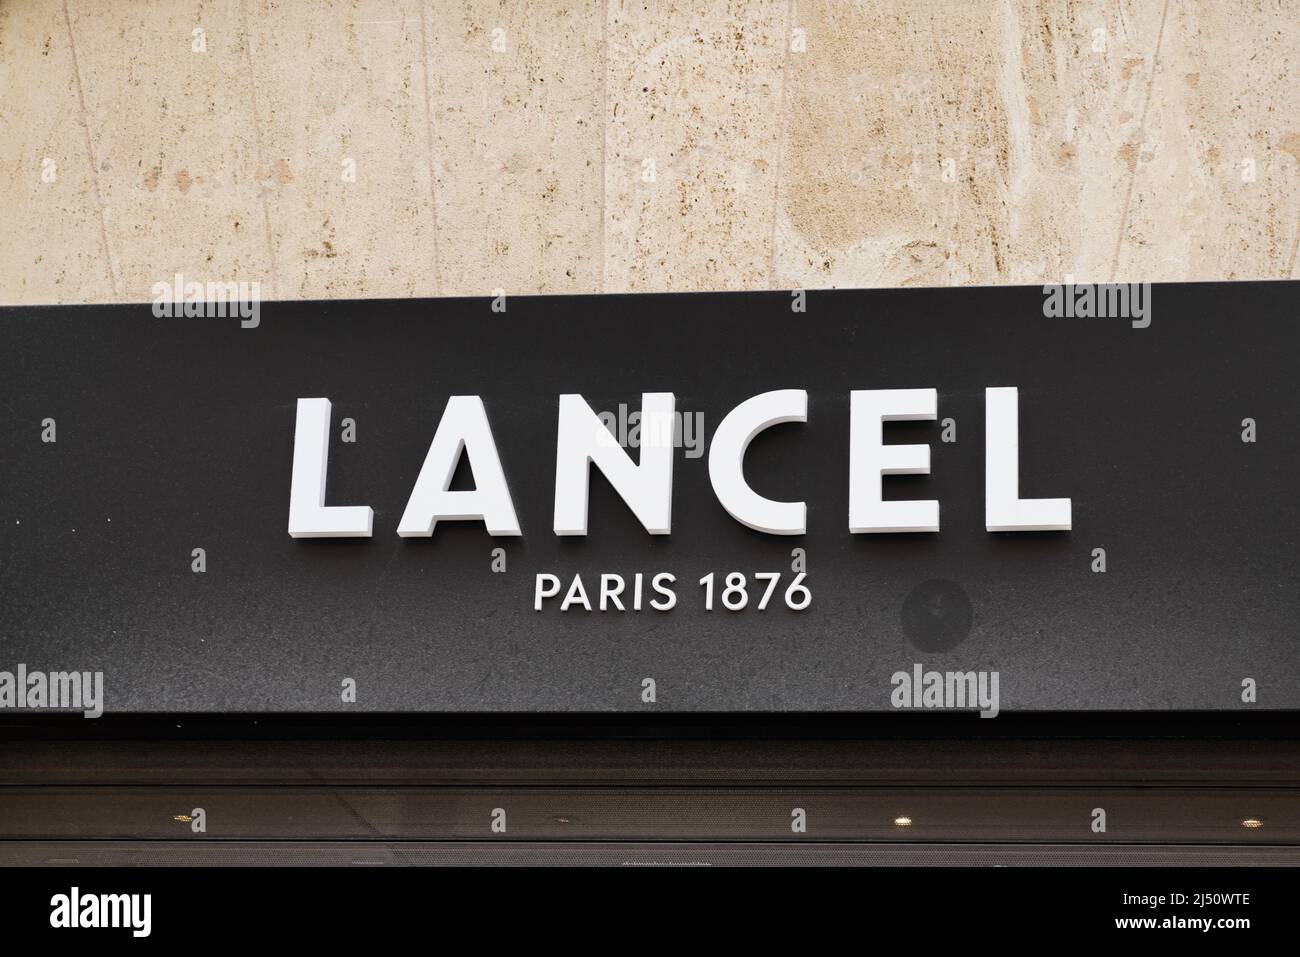 Bordeaux , Aquitaine  France - 03 20 2022 : lancel shop text and sign logo facade store of luxury fashion french brand Stock Photo